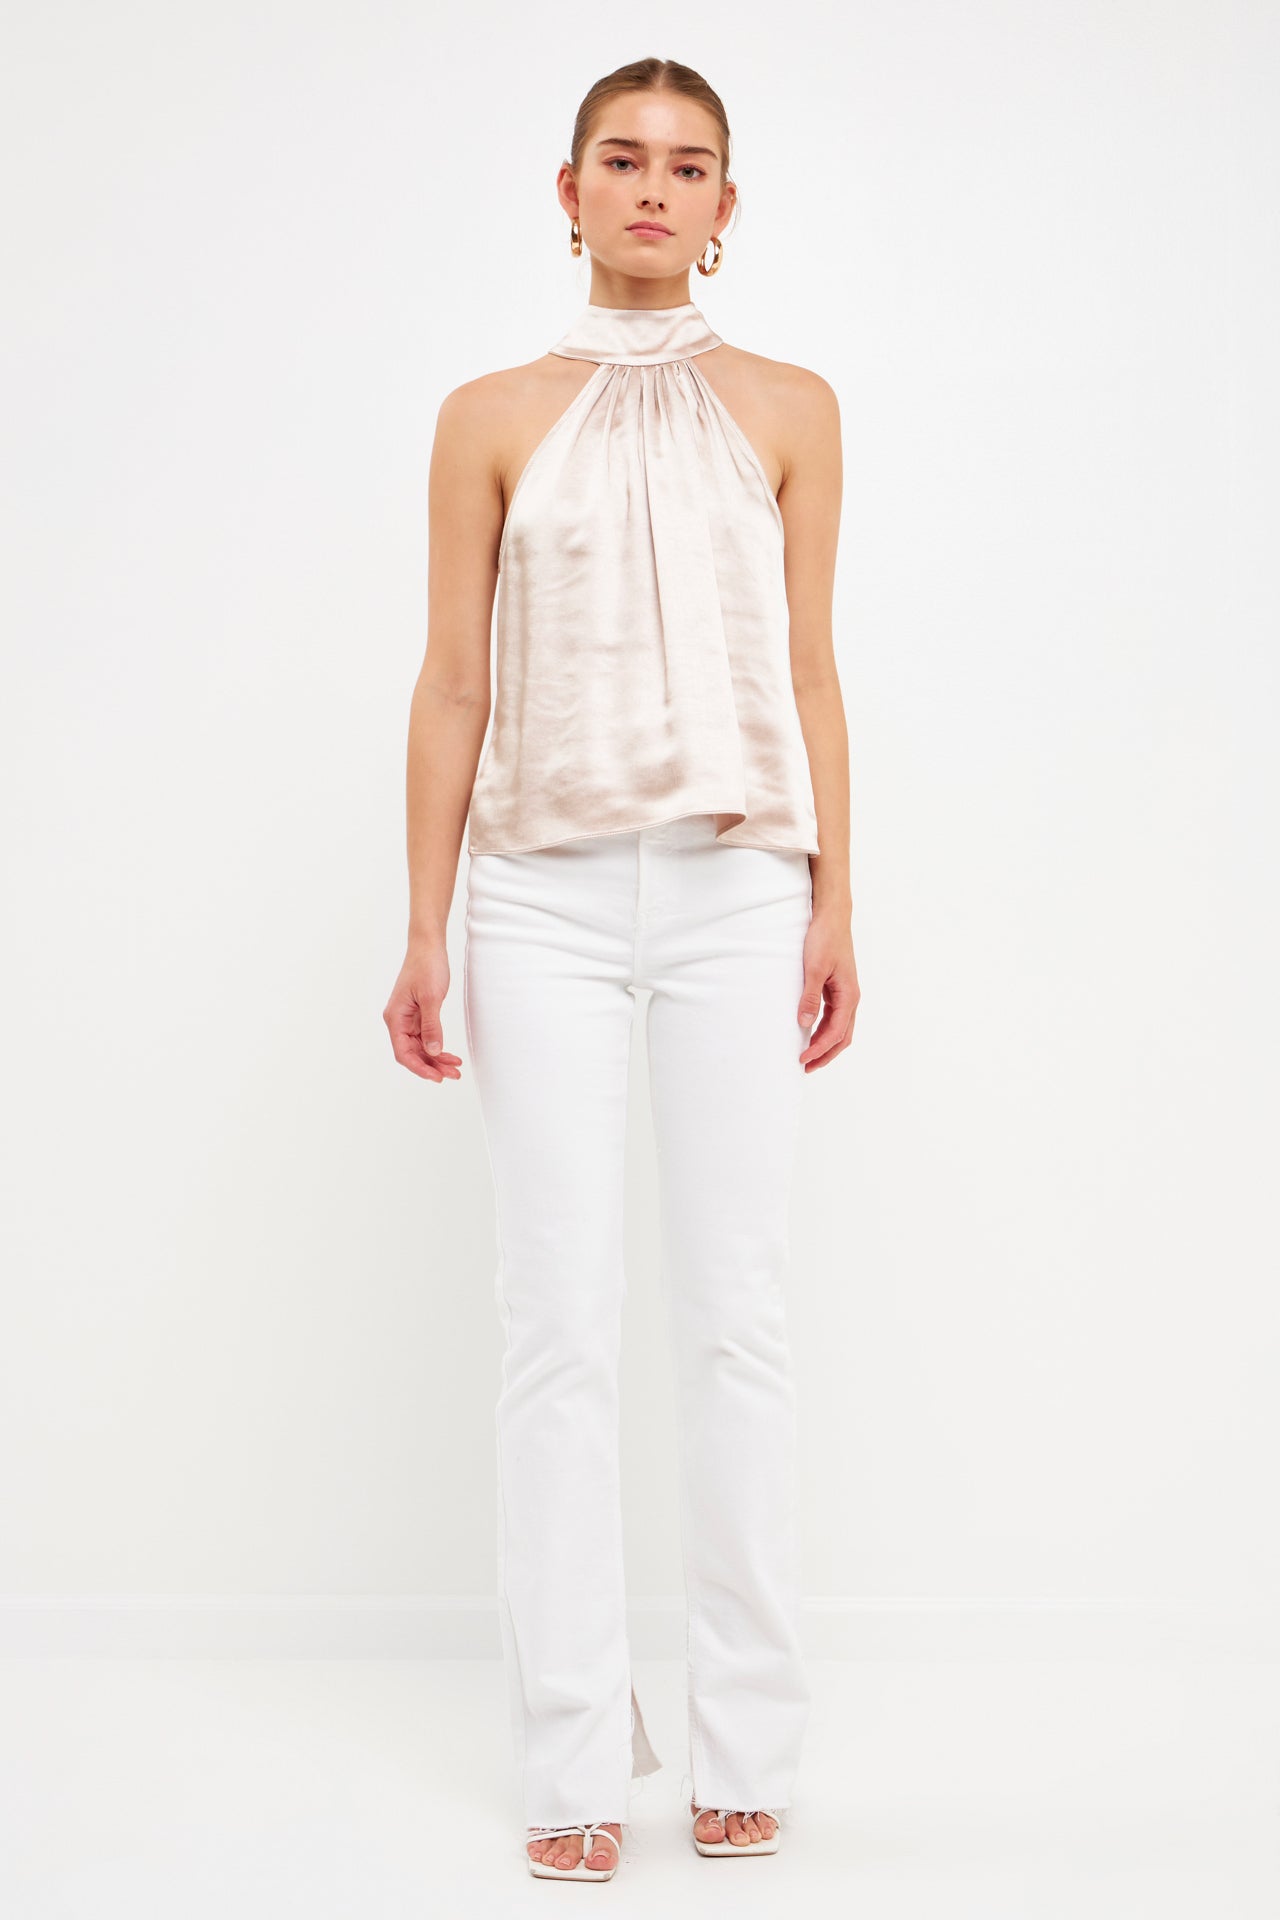 ENDLESS ROSE - Satin Top - TOPS available at Objectrare